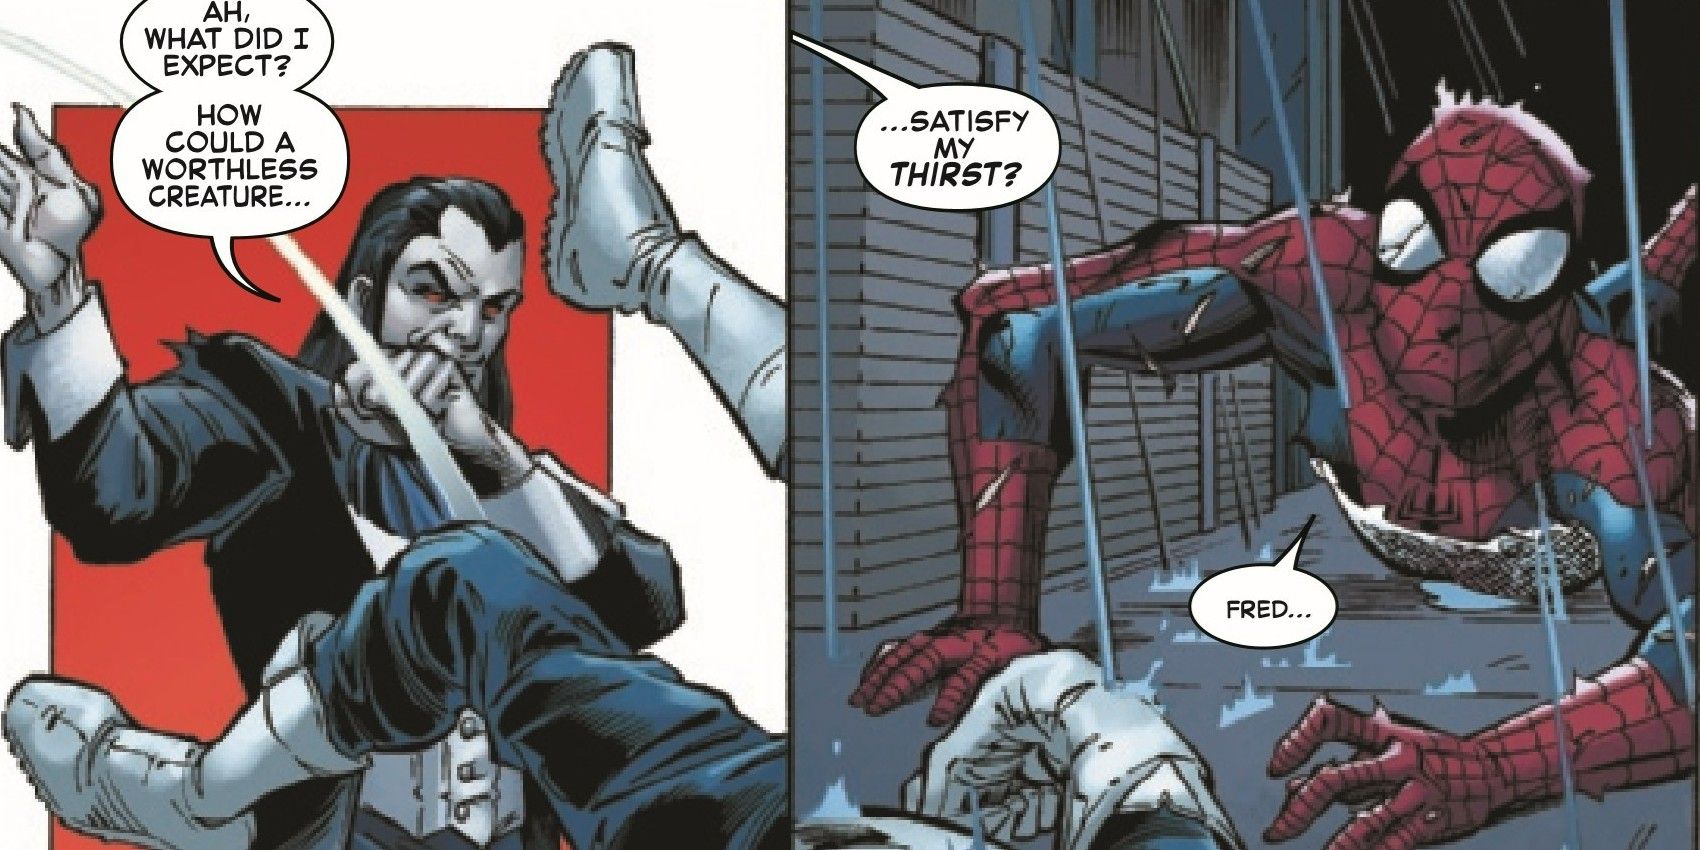 Morlun discarding Boomerang's corpse in front of Spider-Man in Sinister War #4